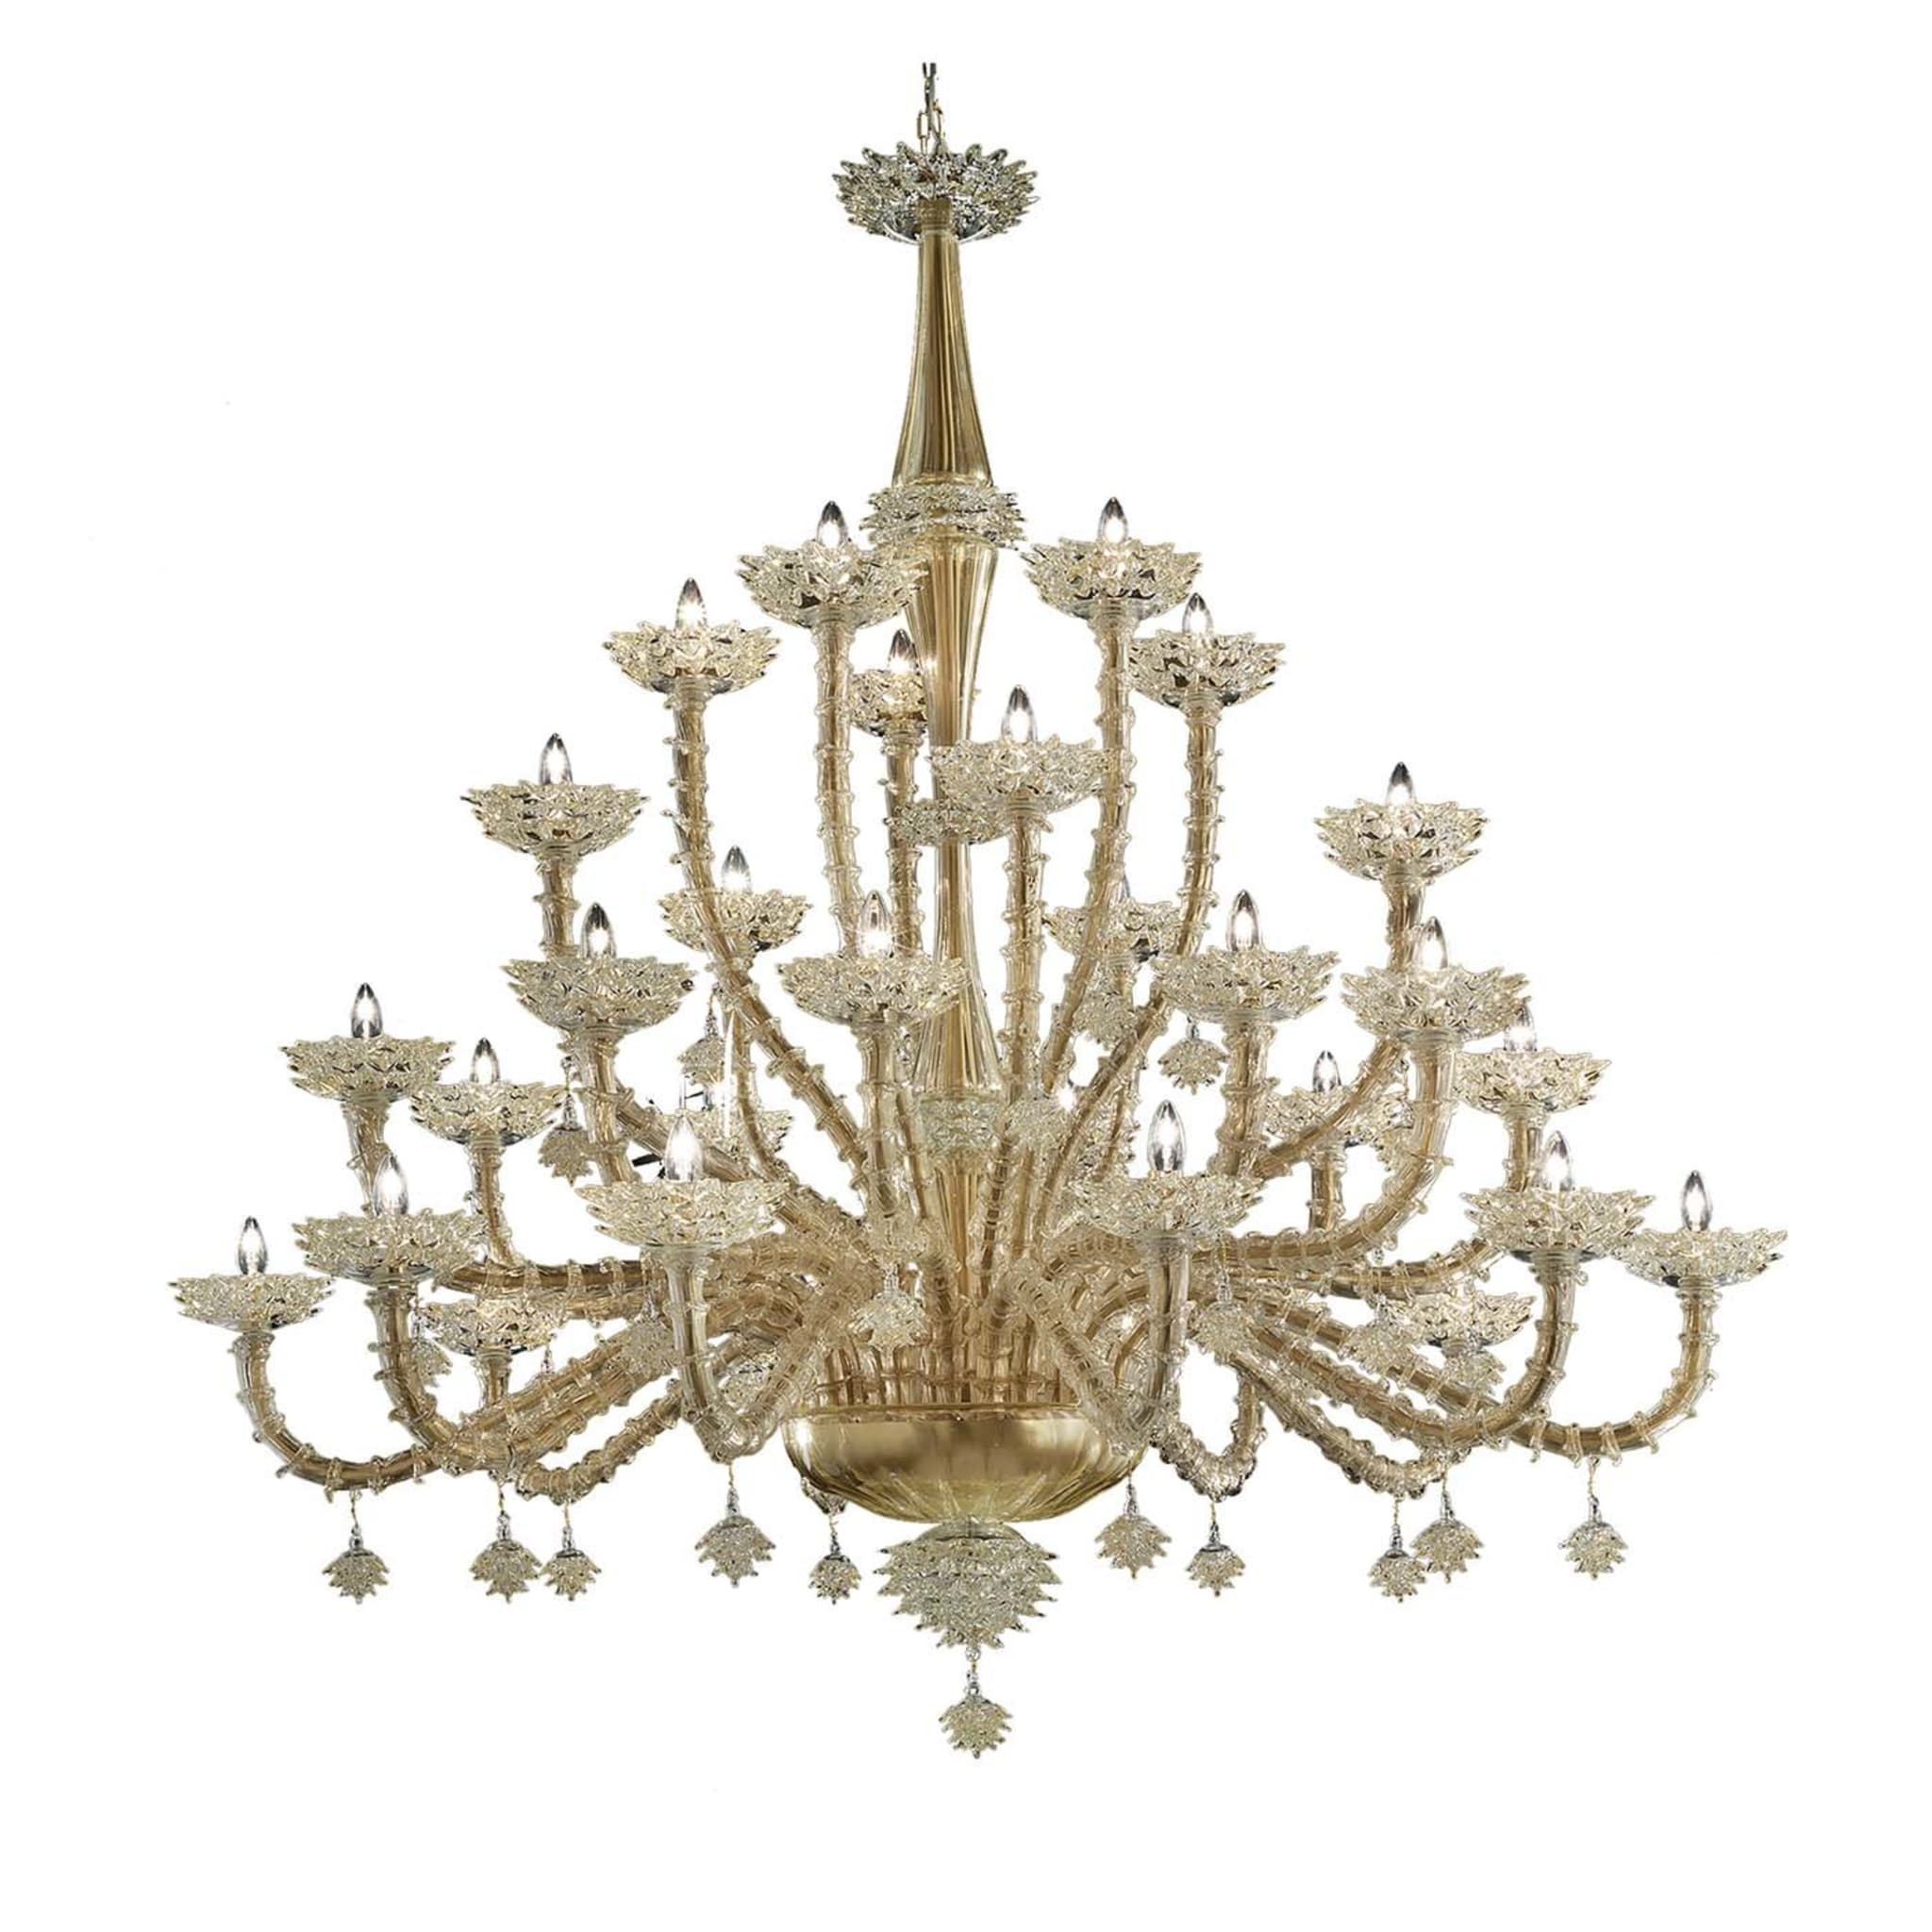 Calle Frizier Chandelier - Main view